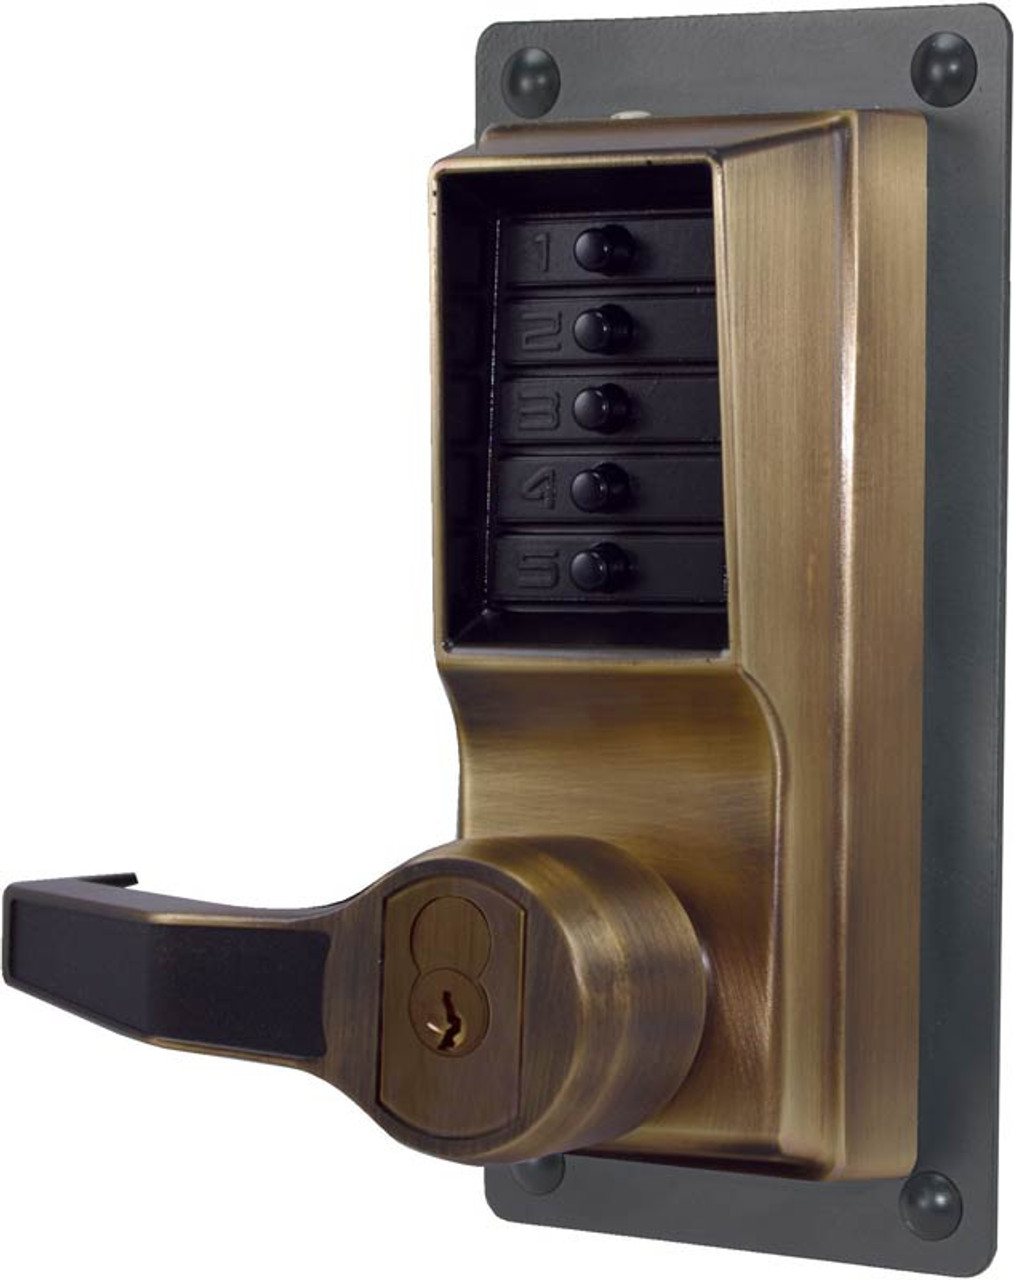 LLP1020C-05 Simplex Exit Trim Lever with Corbin Russwin Removable Core Key Override option in Antique Brass finish